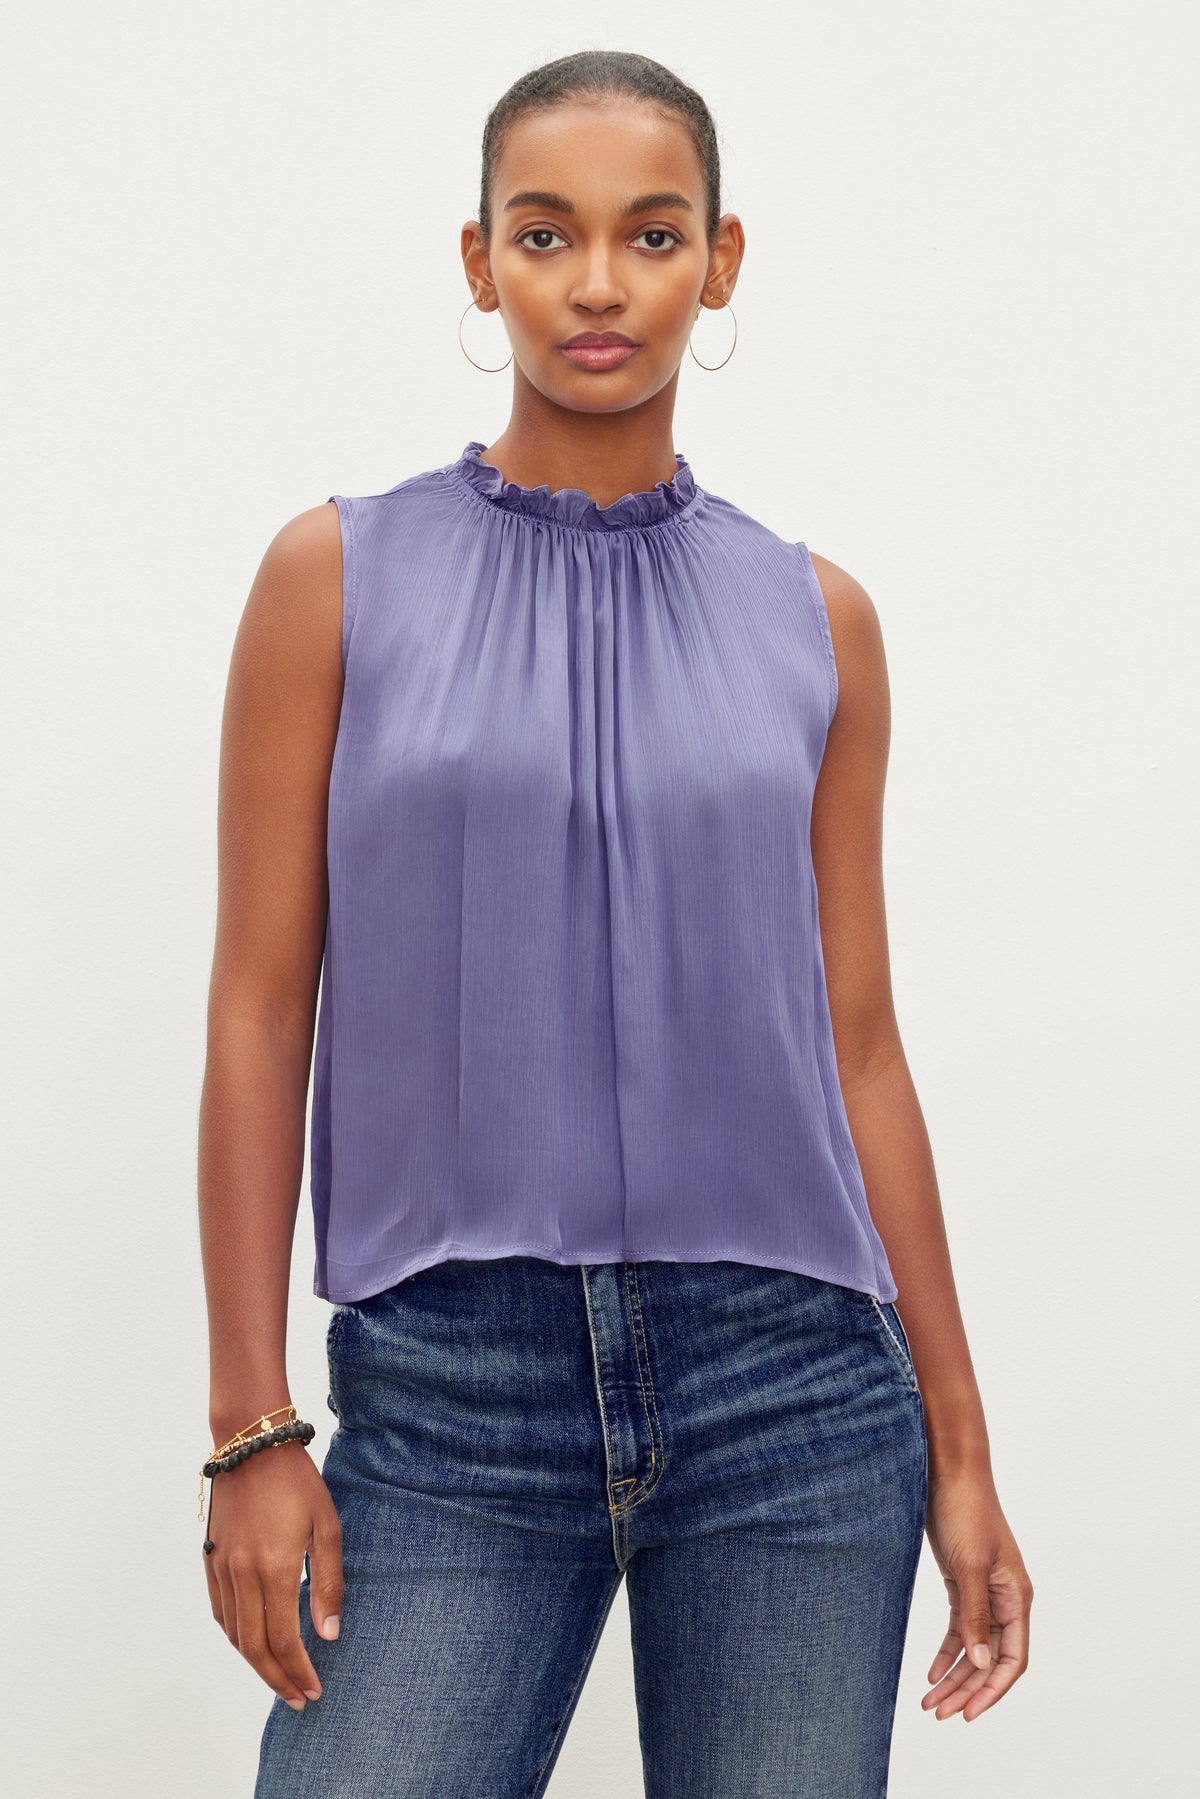   A person stands against a plain background, wearing the Velvet by Graham & Spencer KIANA RUFFLE NECK TANK TOP and blue jeans. 